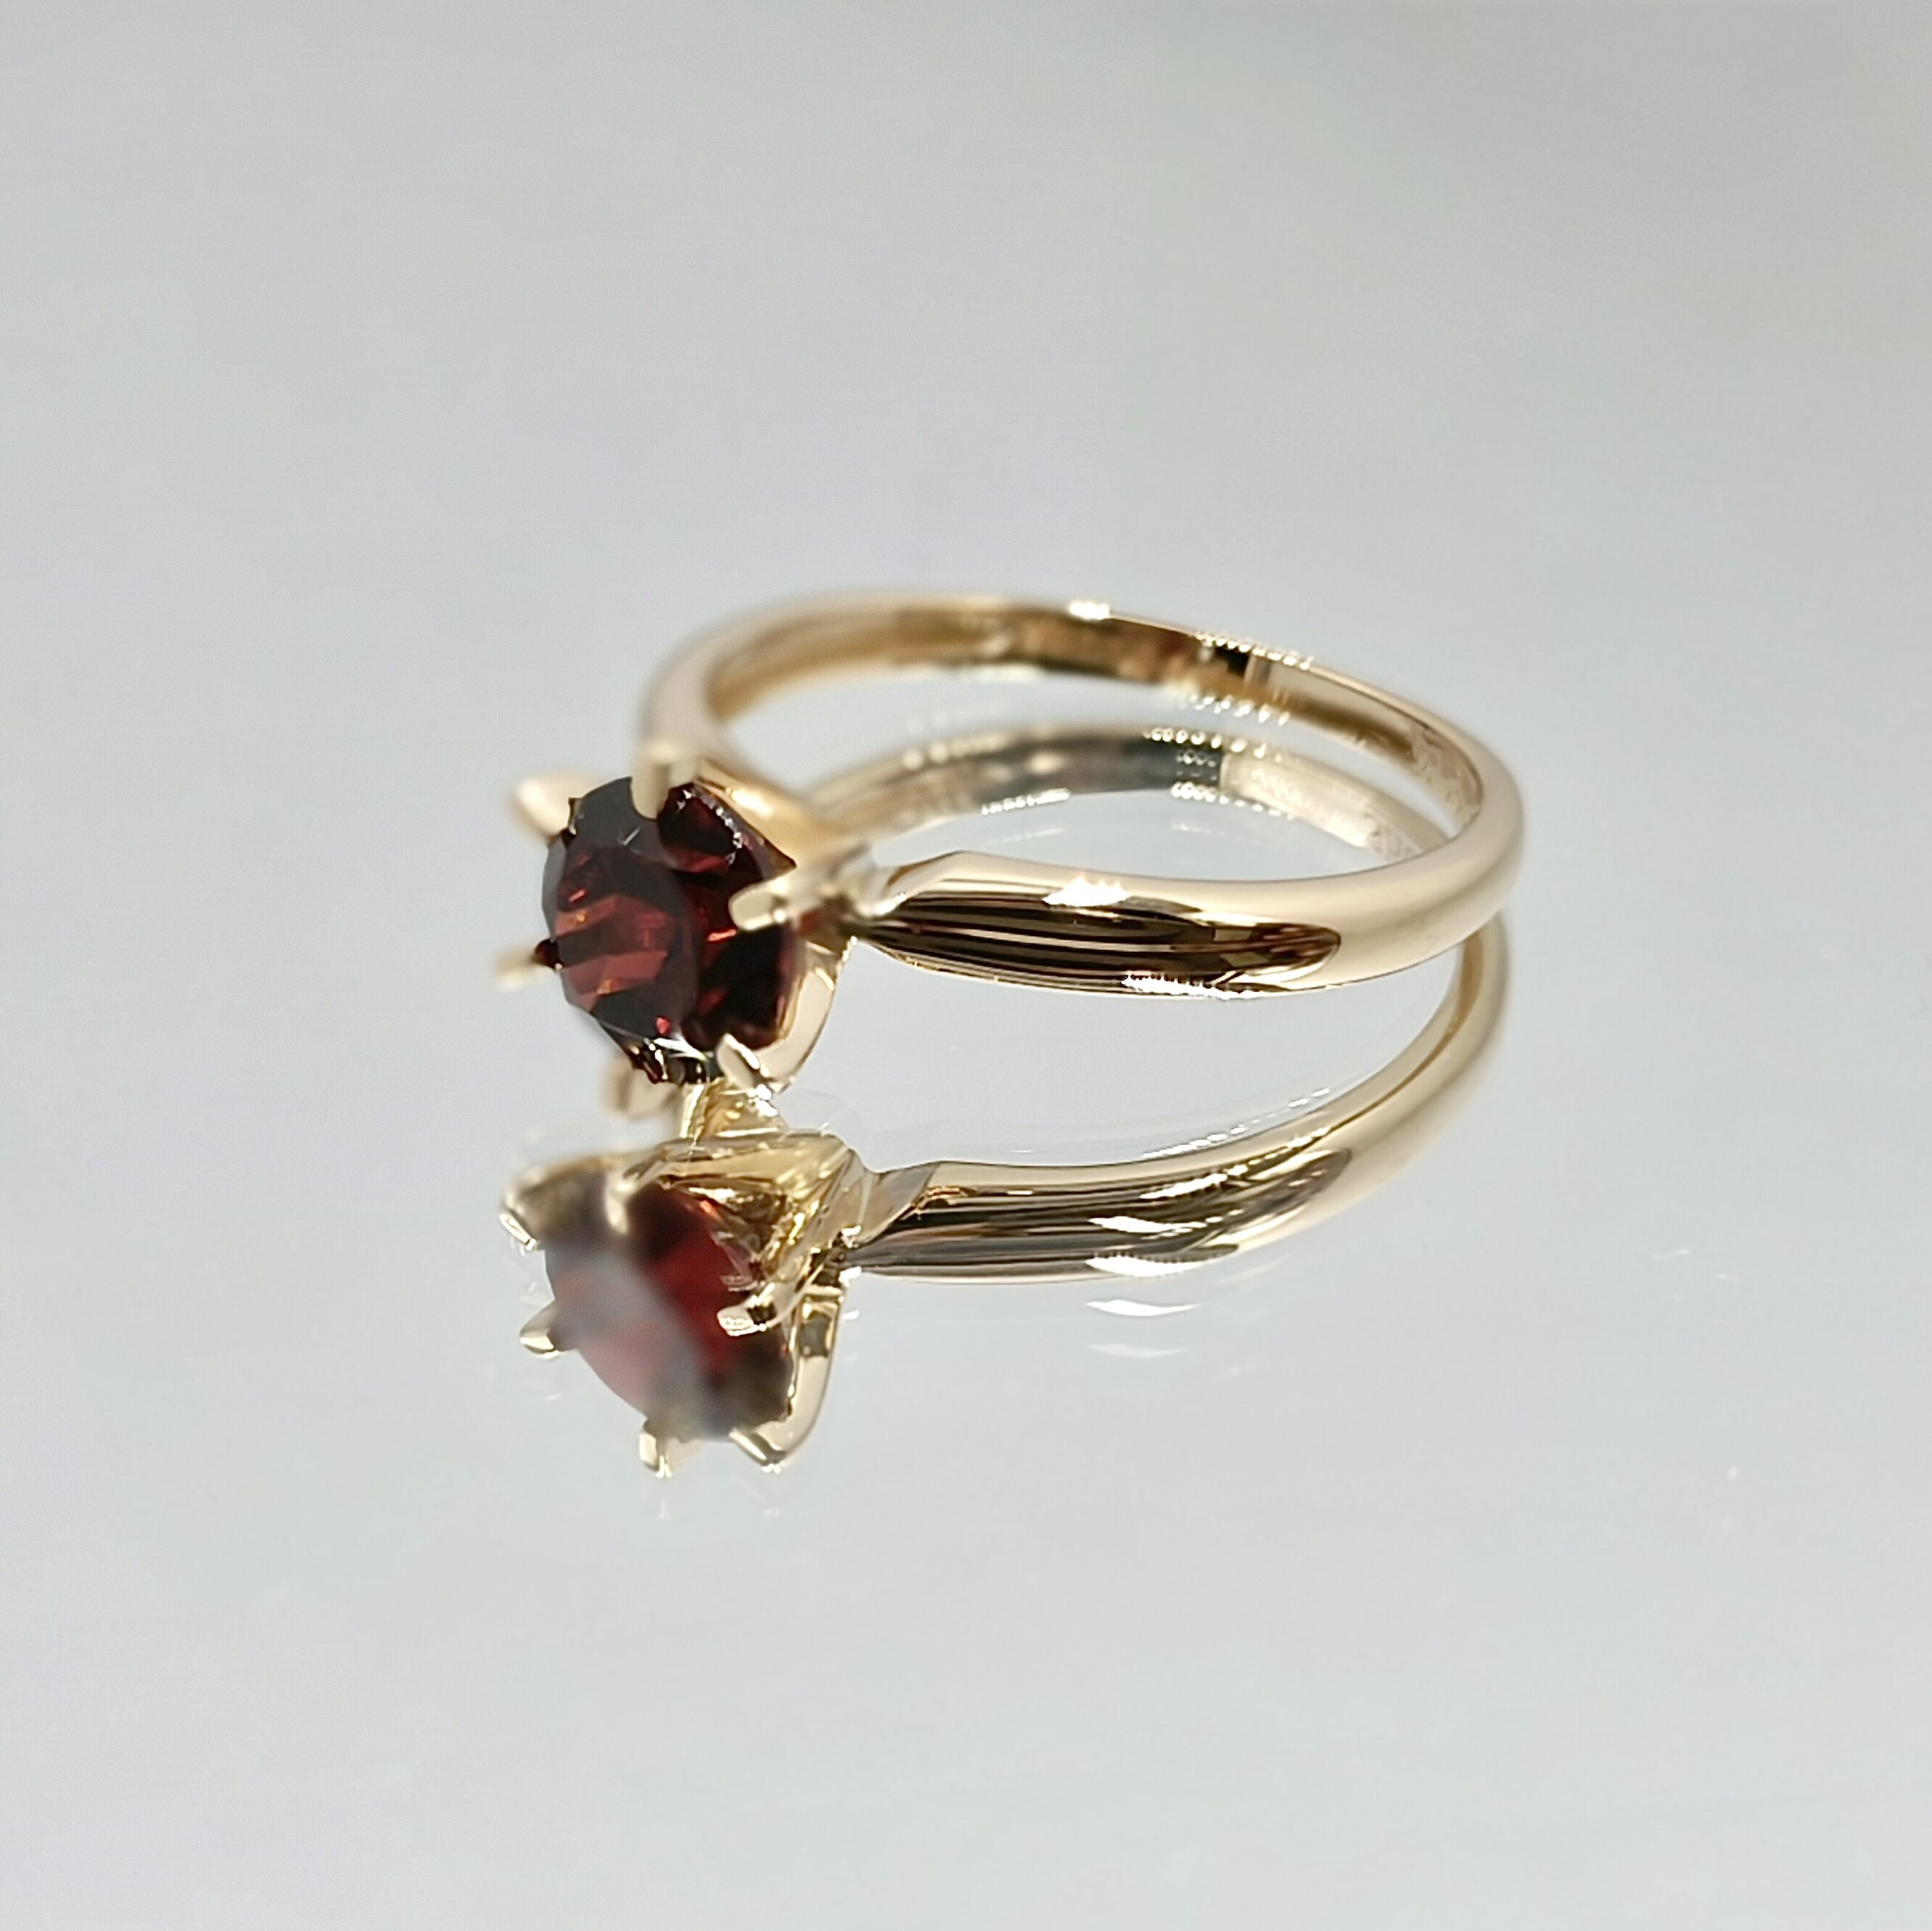 Solitaire Gold Ring Gemstone Rings Red Ruby Round Cut Engagement Ring 14k Gold Jewelry Garnet Stone Ring